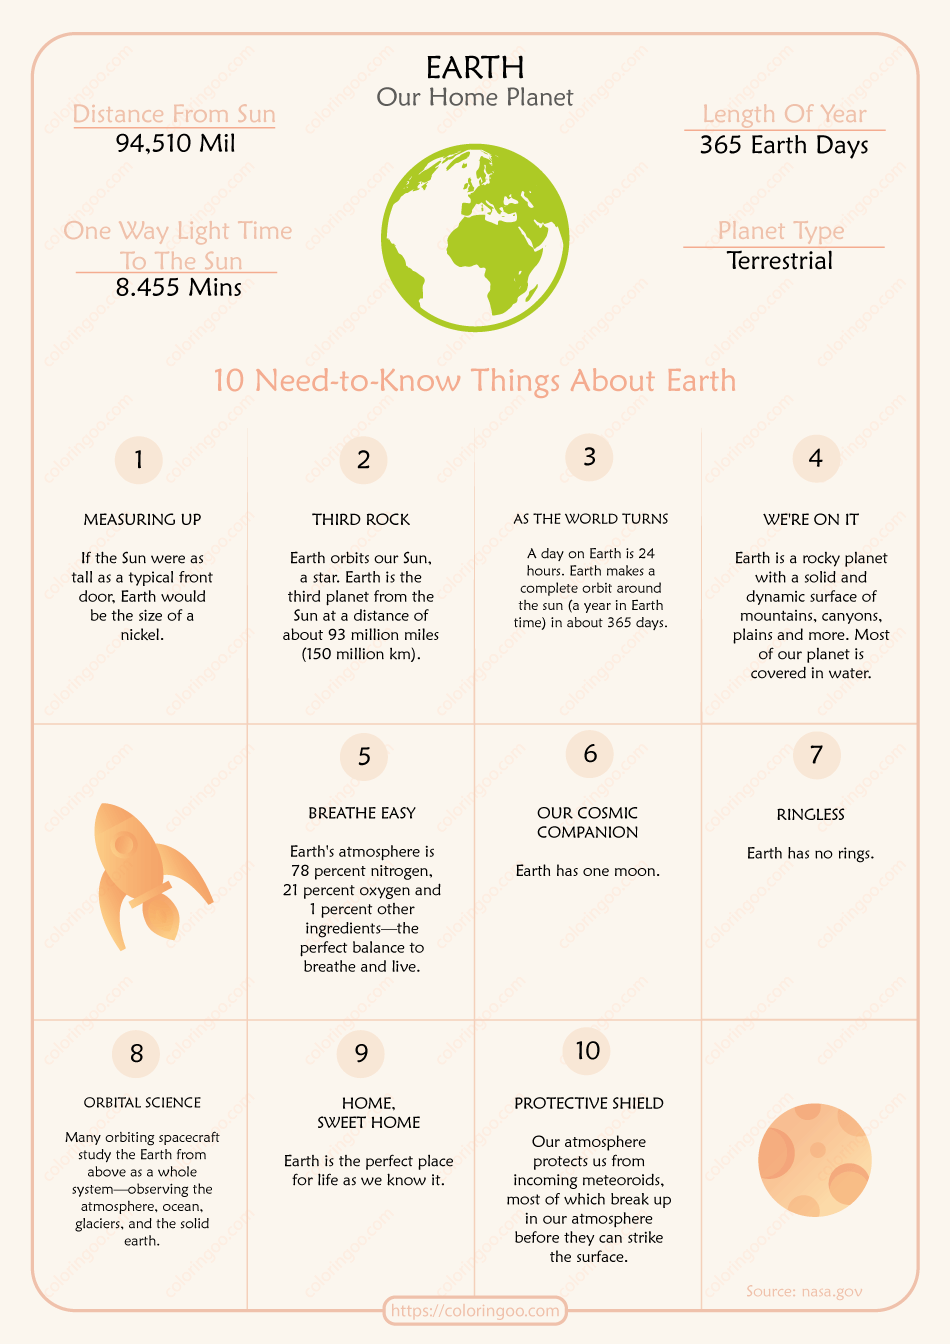 10 need to know things about earth worksheet